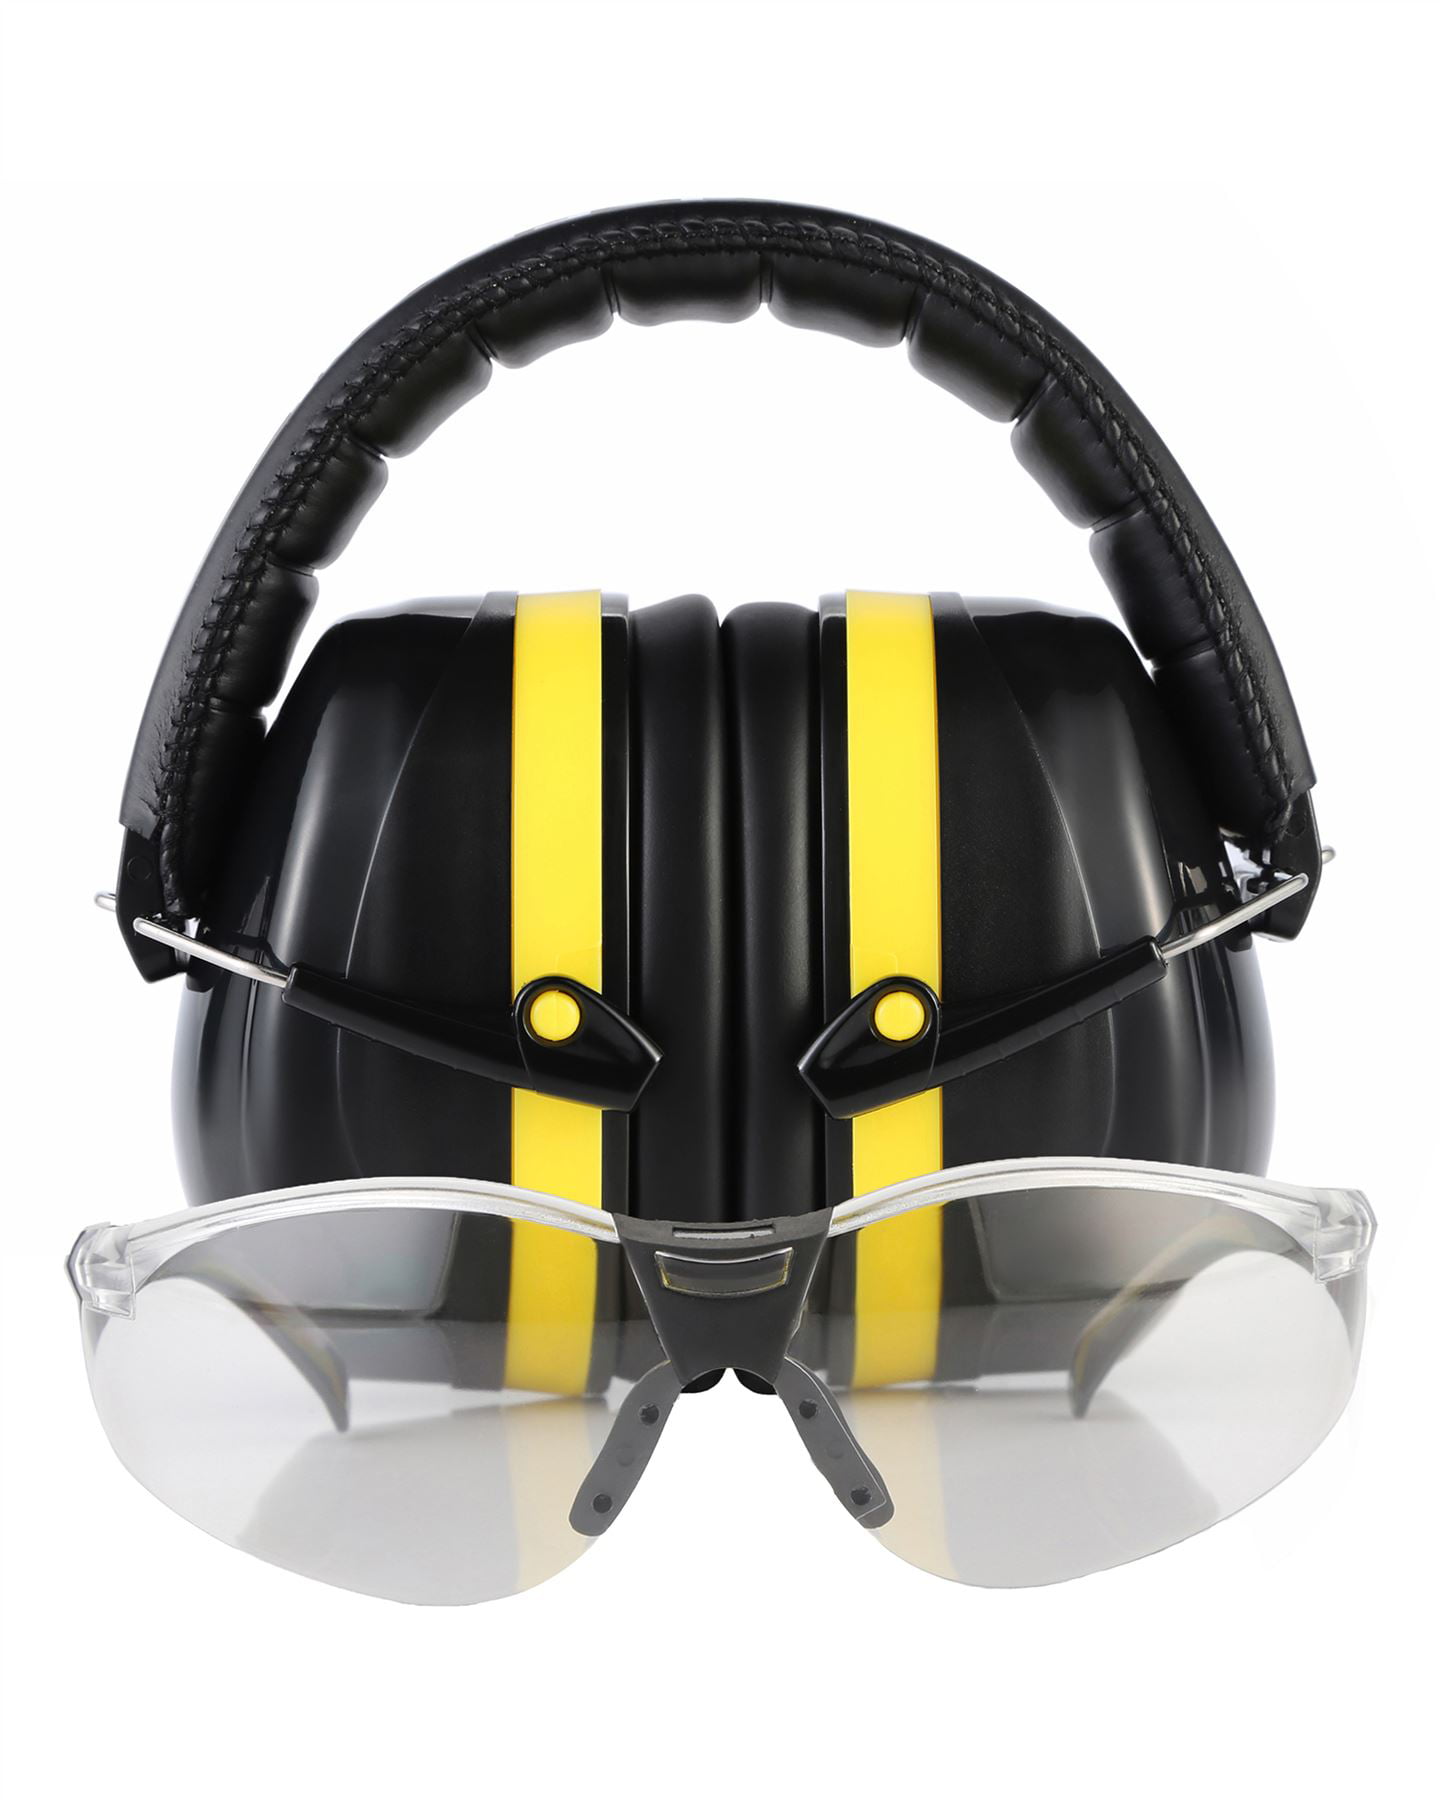 Tradesmart Protection Shooting Earmuffs and Safety Glasses Kit in Black & Yellow 